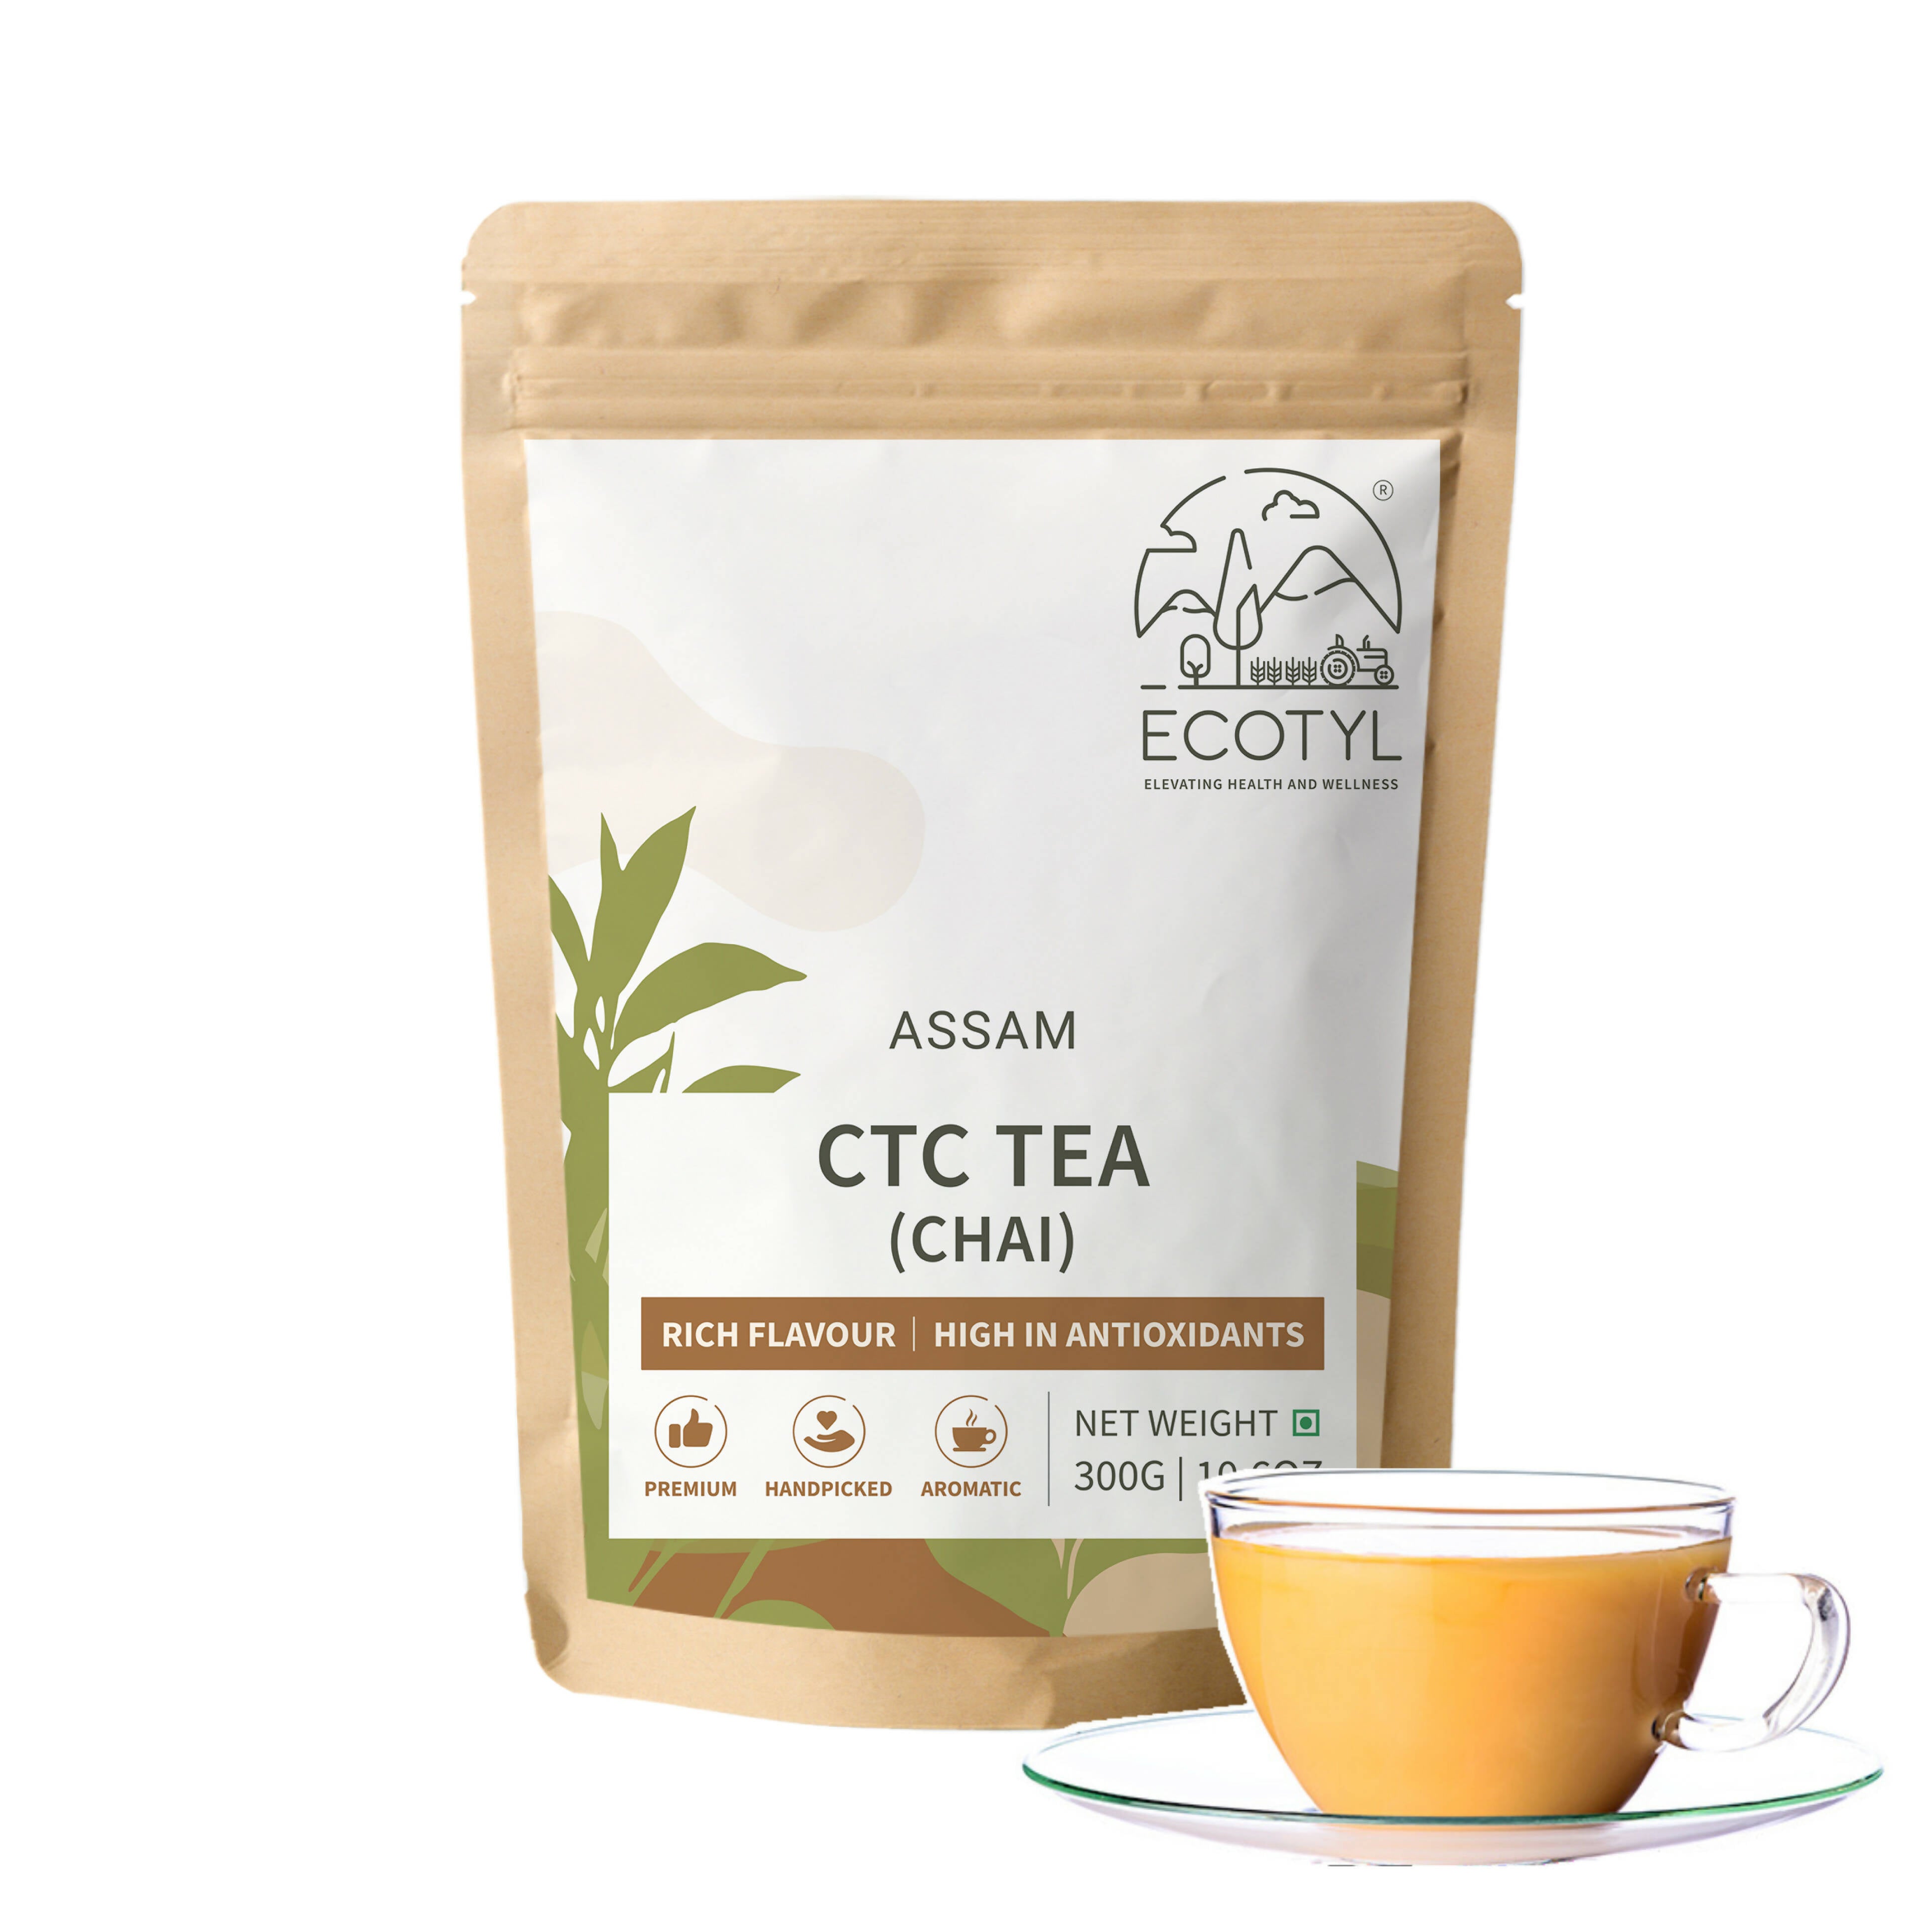 Ecotyl CTC Tea (Chai Patti) From Assam | Strong Flavour | Classic | 300g